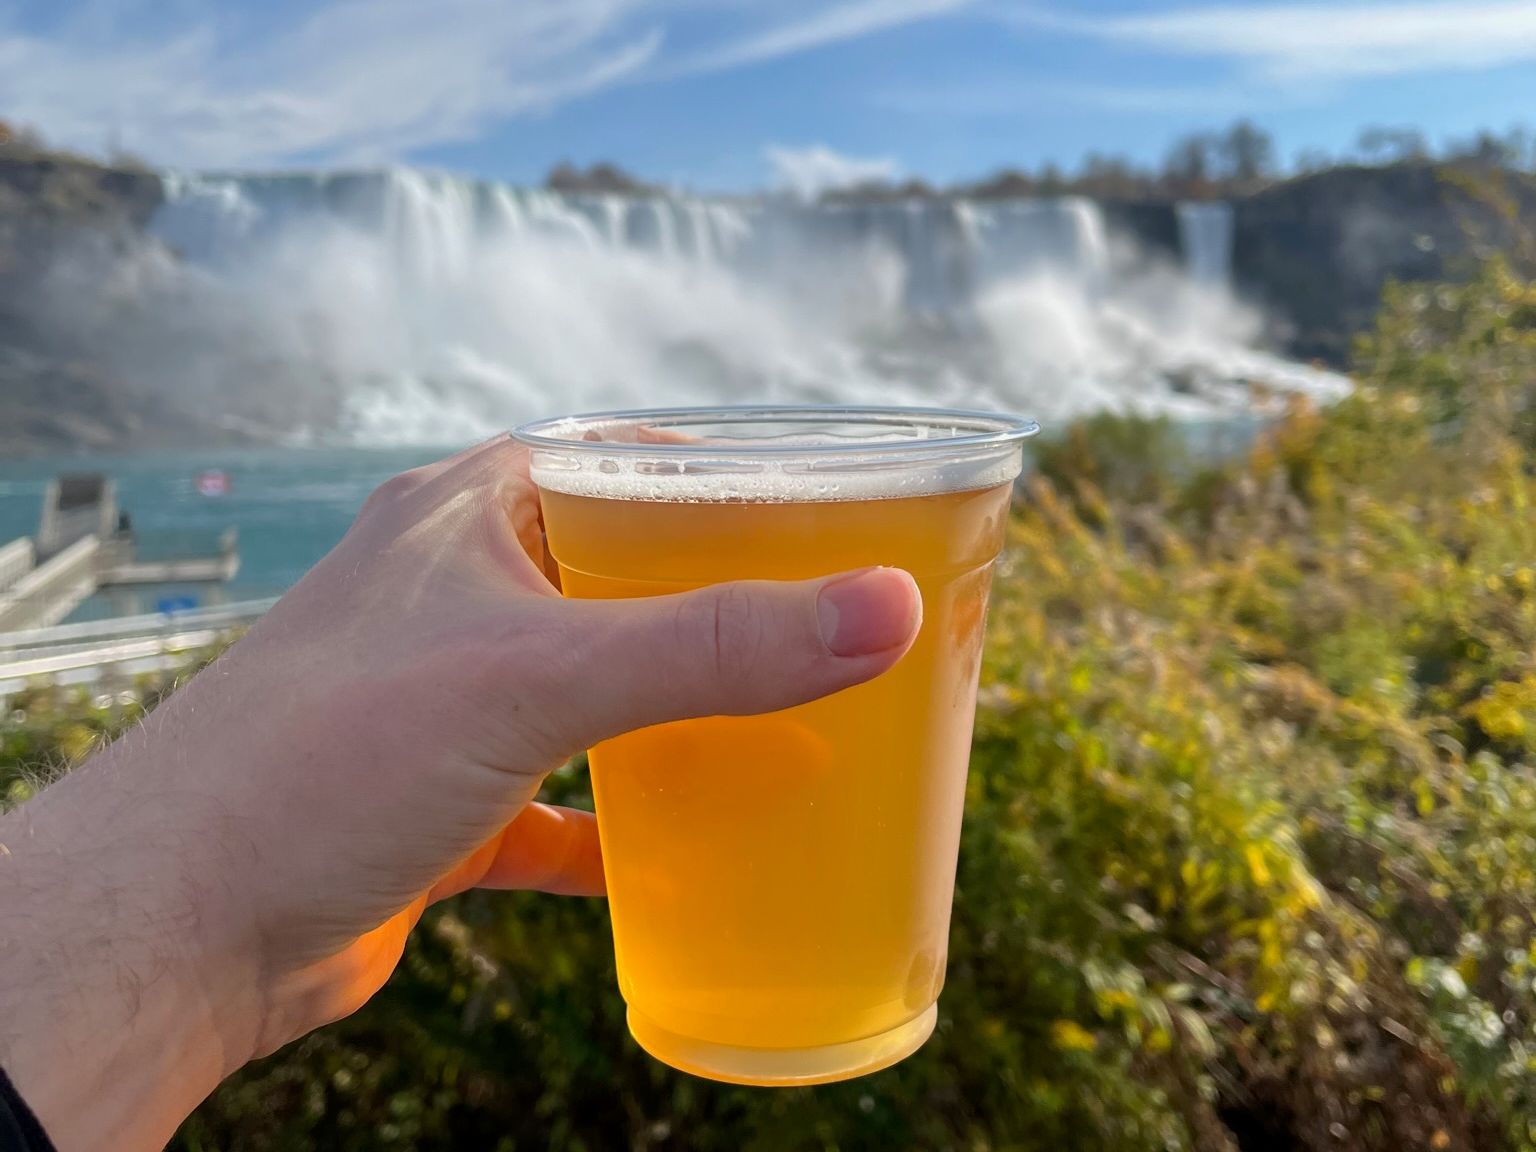 Drinking a cold beverage with the Niagara Falls in the background